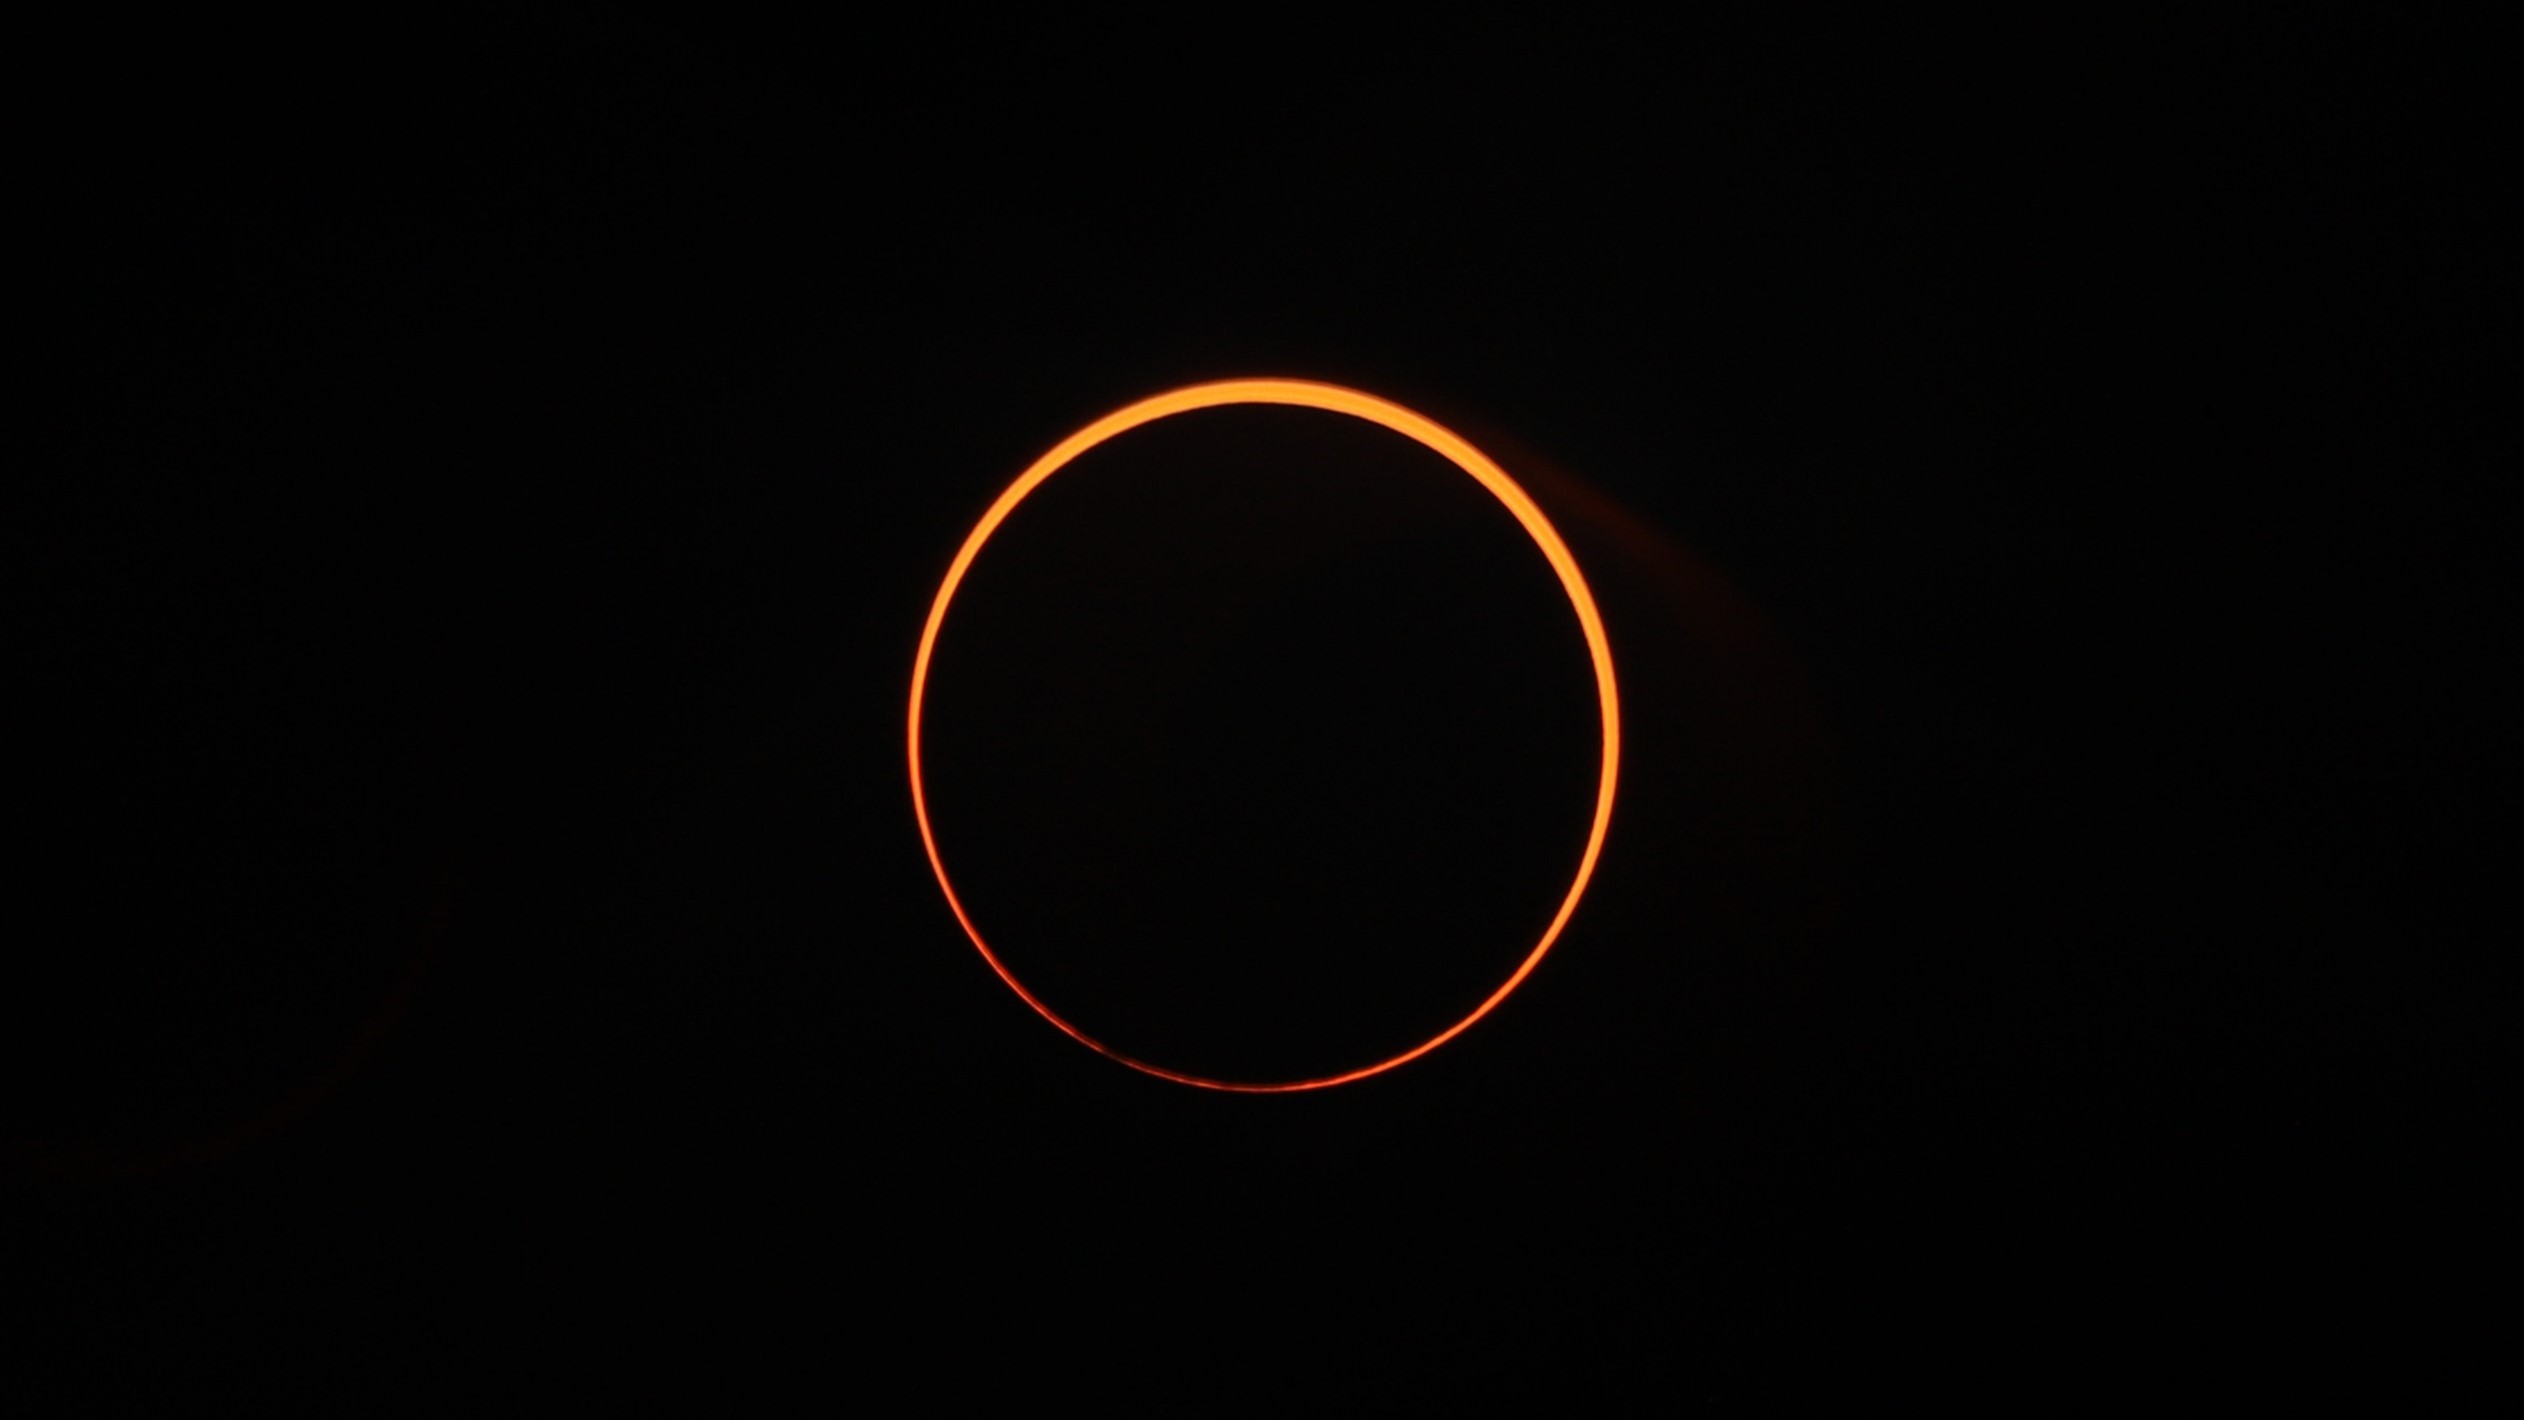 The sun appears as an orange ring against the black sky.